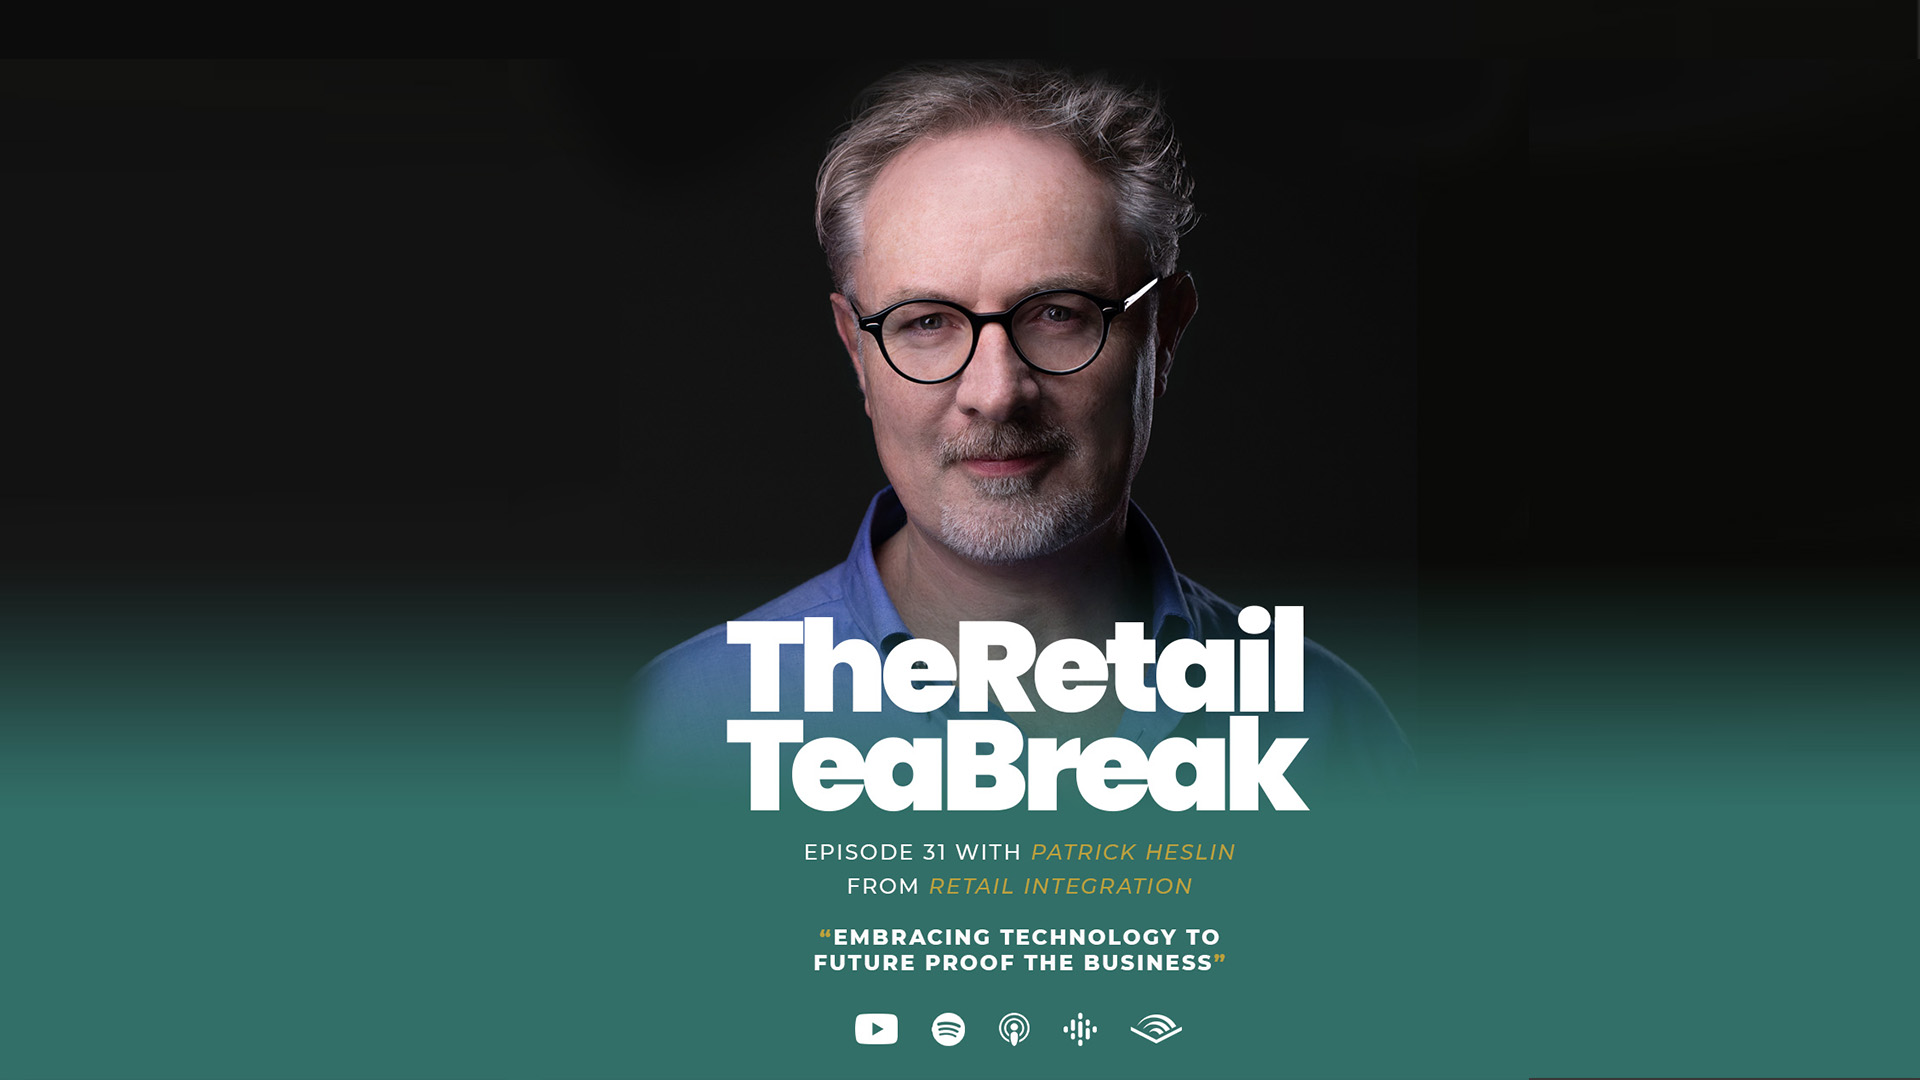 The Retail Tea Break podcast features Patrick Heslin, Retail Integration MD